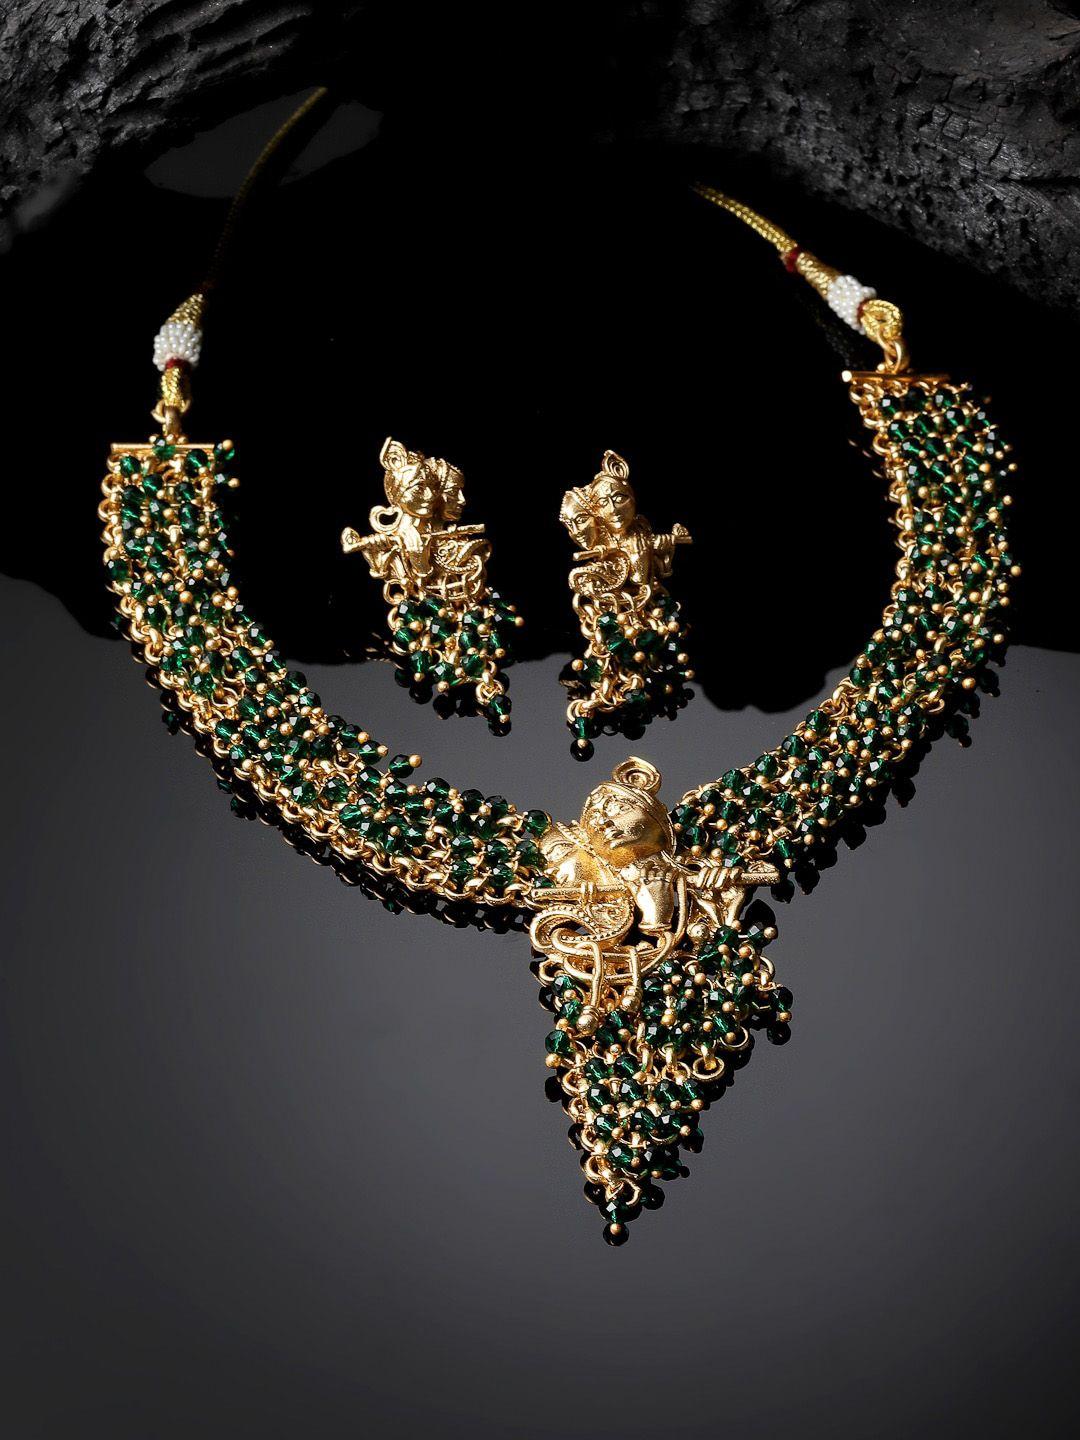 ADIVA Gold-Plated Beads Radha Krishna Necklace and Earrings